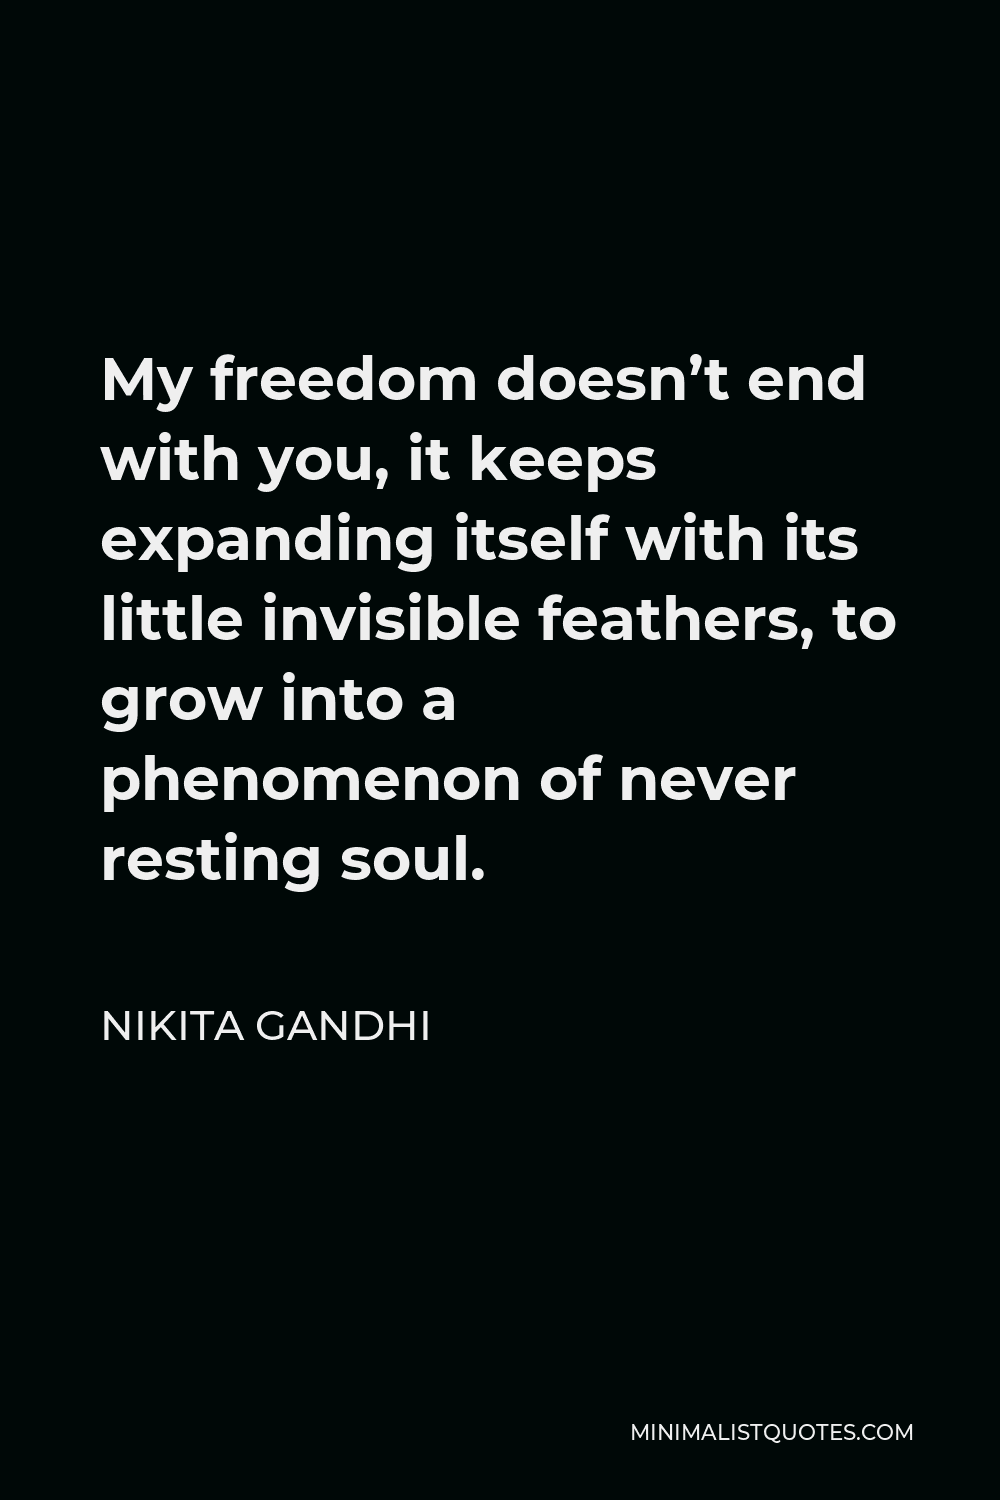 Nikita Gandhi Quote - My freedom doesn’t end with you, it keeps expanding itself with its little invisible feathers, to grow into a phenomenon of never resting soul.